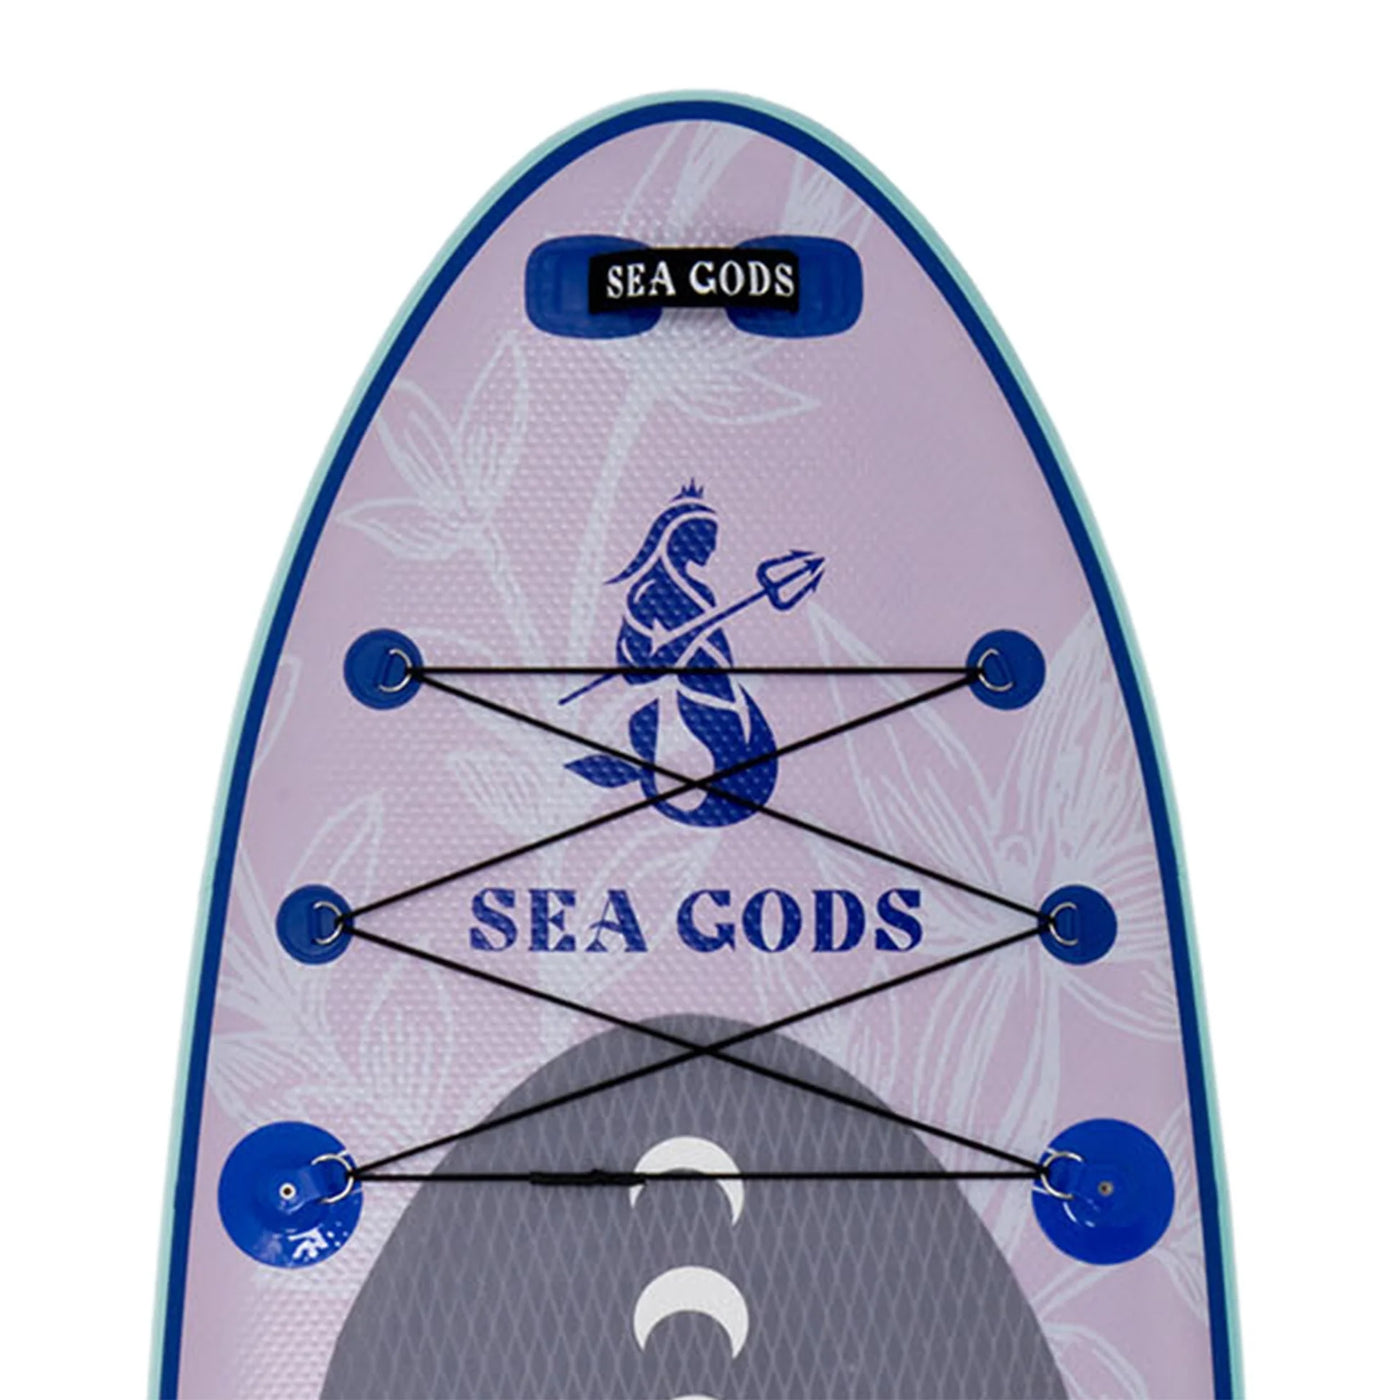 Infinite Mantra 11' - Inflatable Stand Up Paddleboard Package